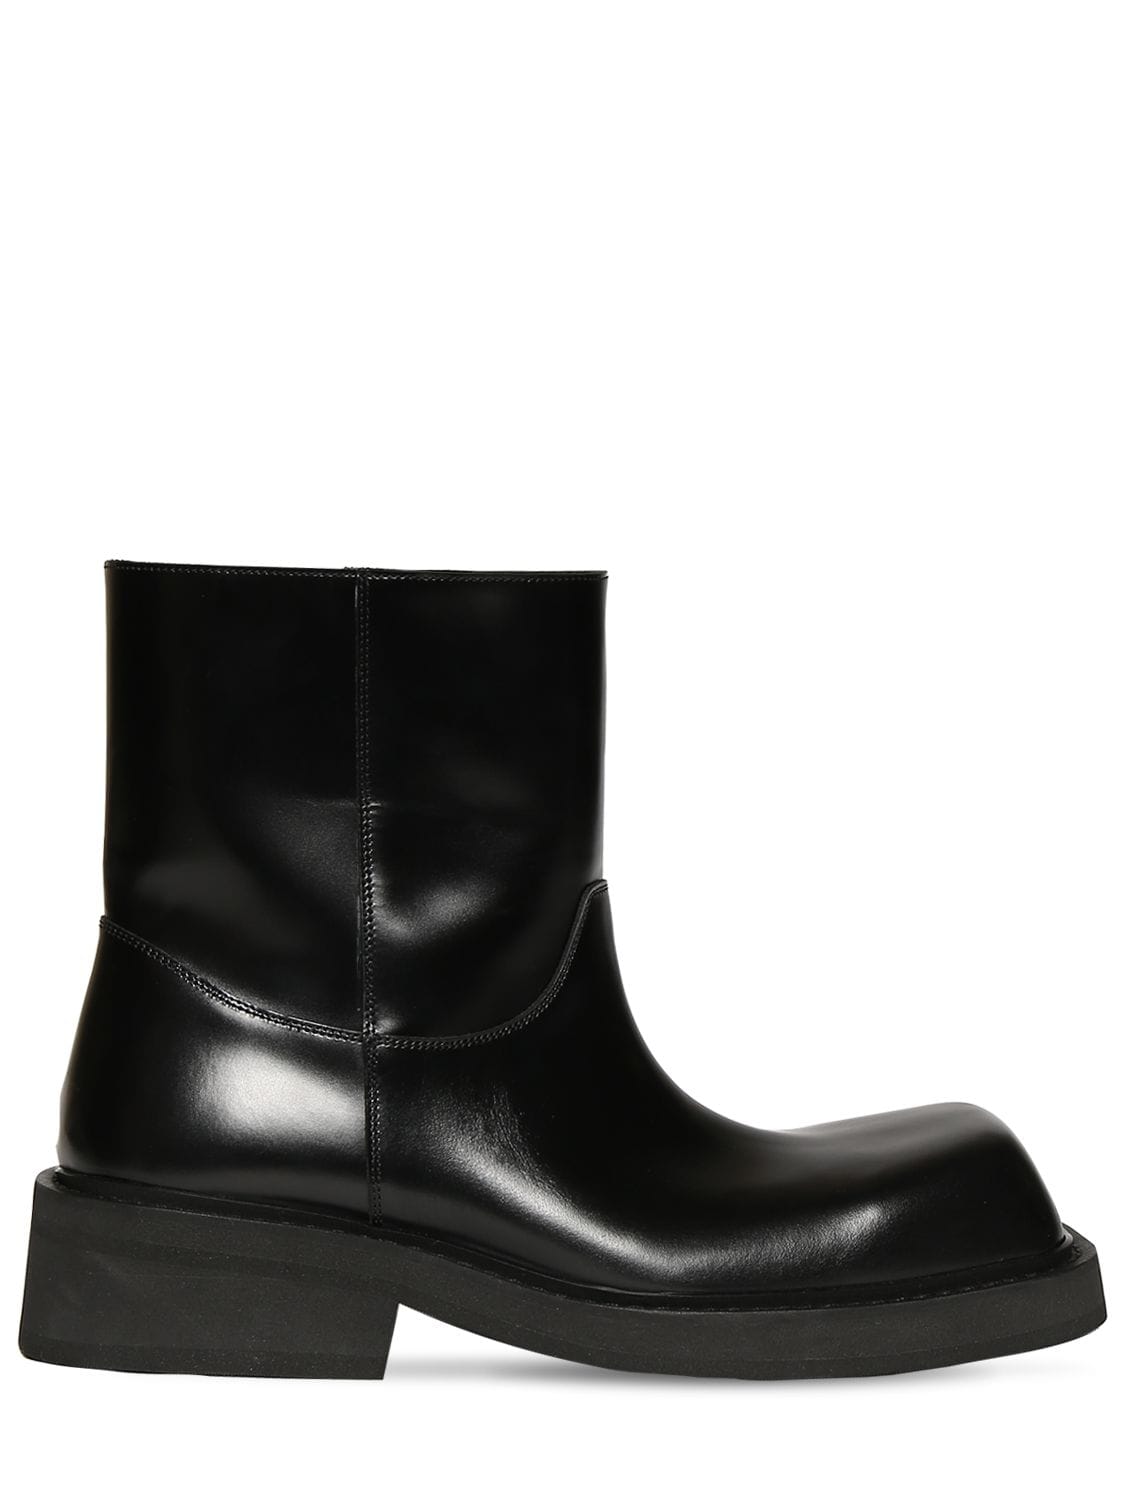 Balenciaga Inspector Bootie Leather Boots In Black